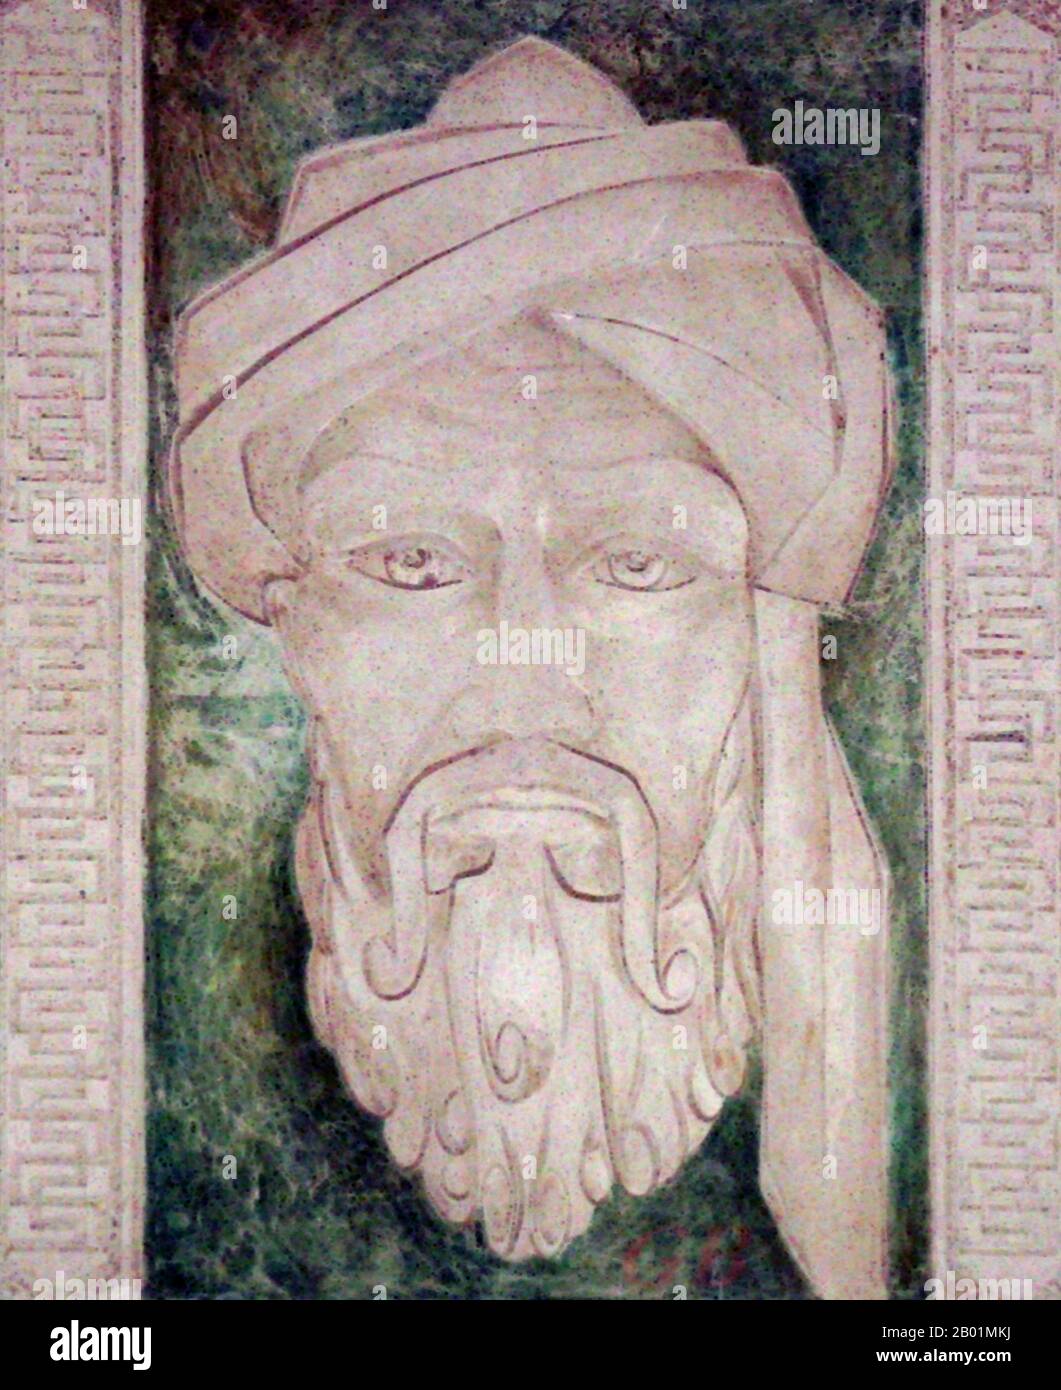 Iran/Uzbekistan: Al Khwarizmi (780-850), Persian mathematician, astronomer and geographer. A representation in the Museum of Ancient Khorezm, Khiva. Photo by Euyasik (CC BY-SA 3.0 License).  Abū ʿAbdallāh Muḥammad ibn Mūsā al-Khwārizmī, earlier transliterated as Algoritmi or Algaurizin, was a Persian mathematician, astronomer and geographer, a scholar in the House of Wisdom in Baghdad.  In the twelfth century, Latin translations of his work on the Indian numerals introduced the decimal positional number system to the Western world. Stock Photo